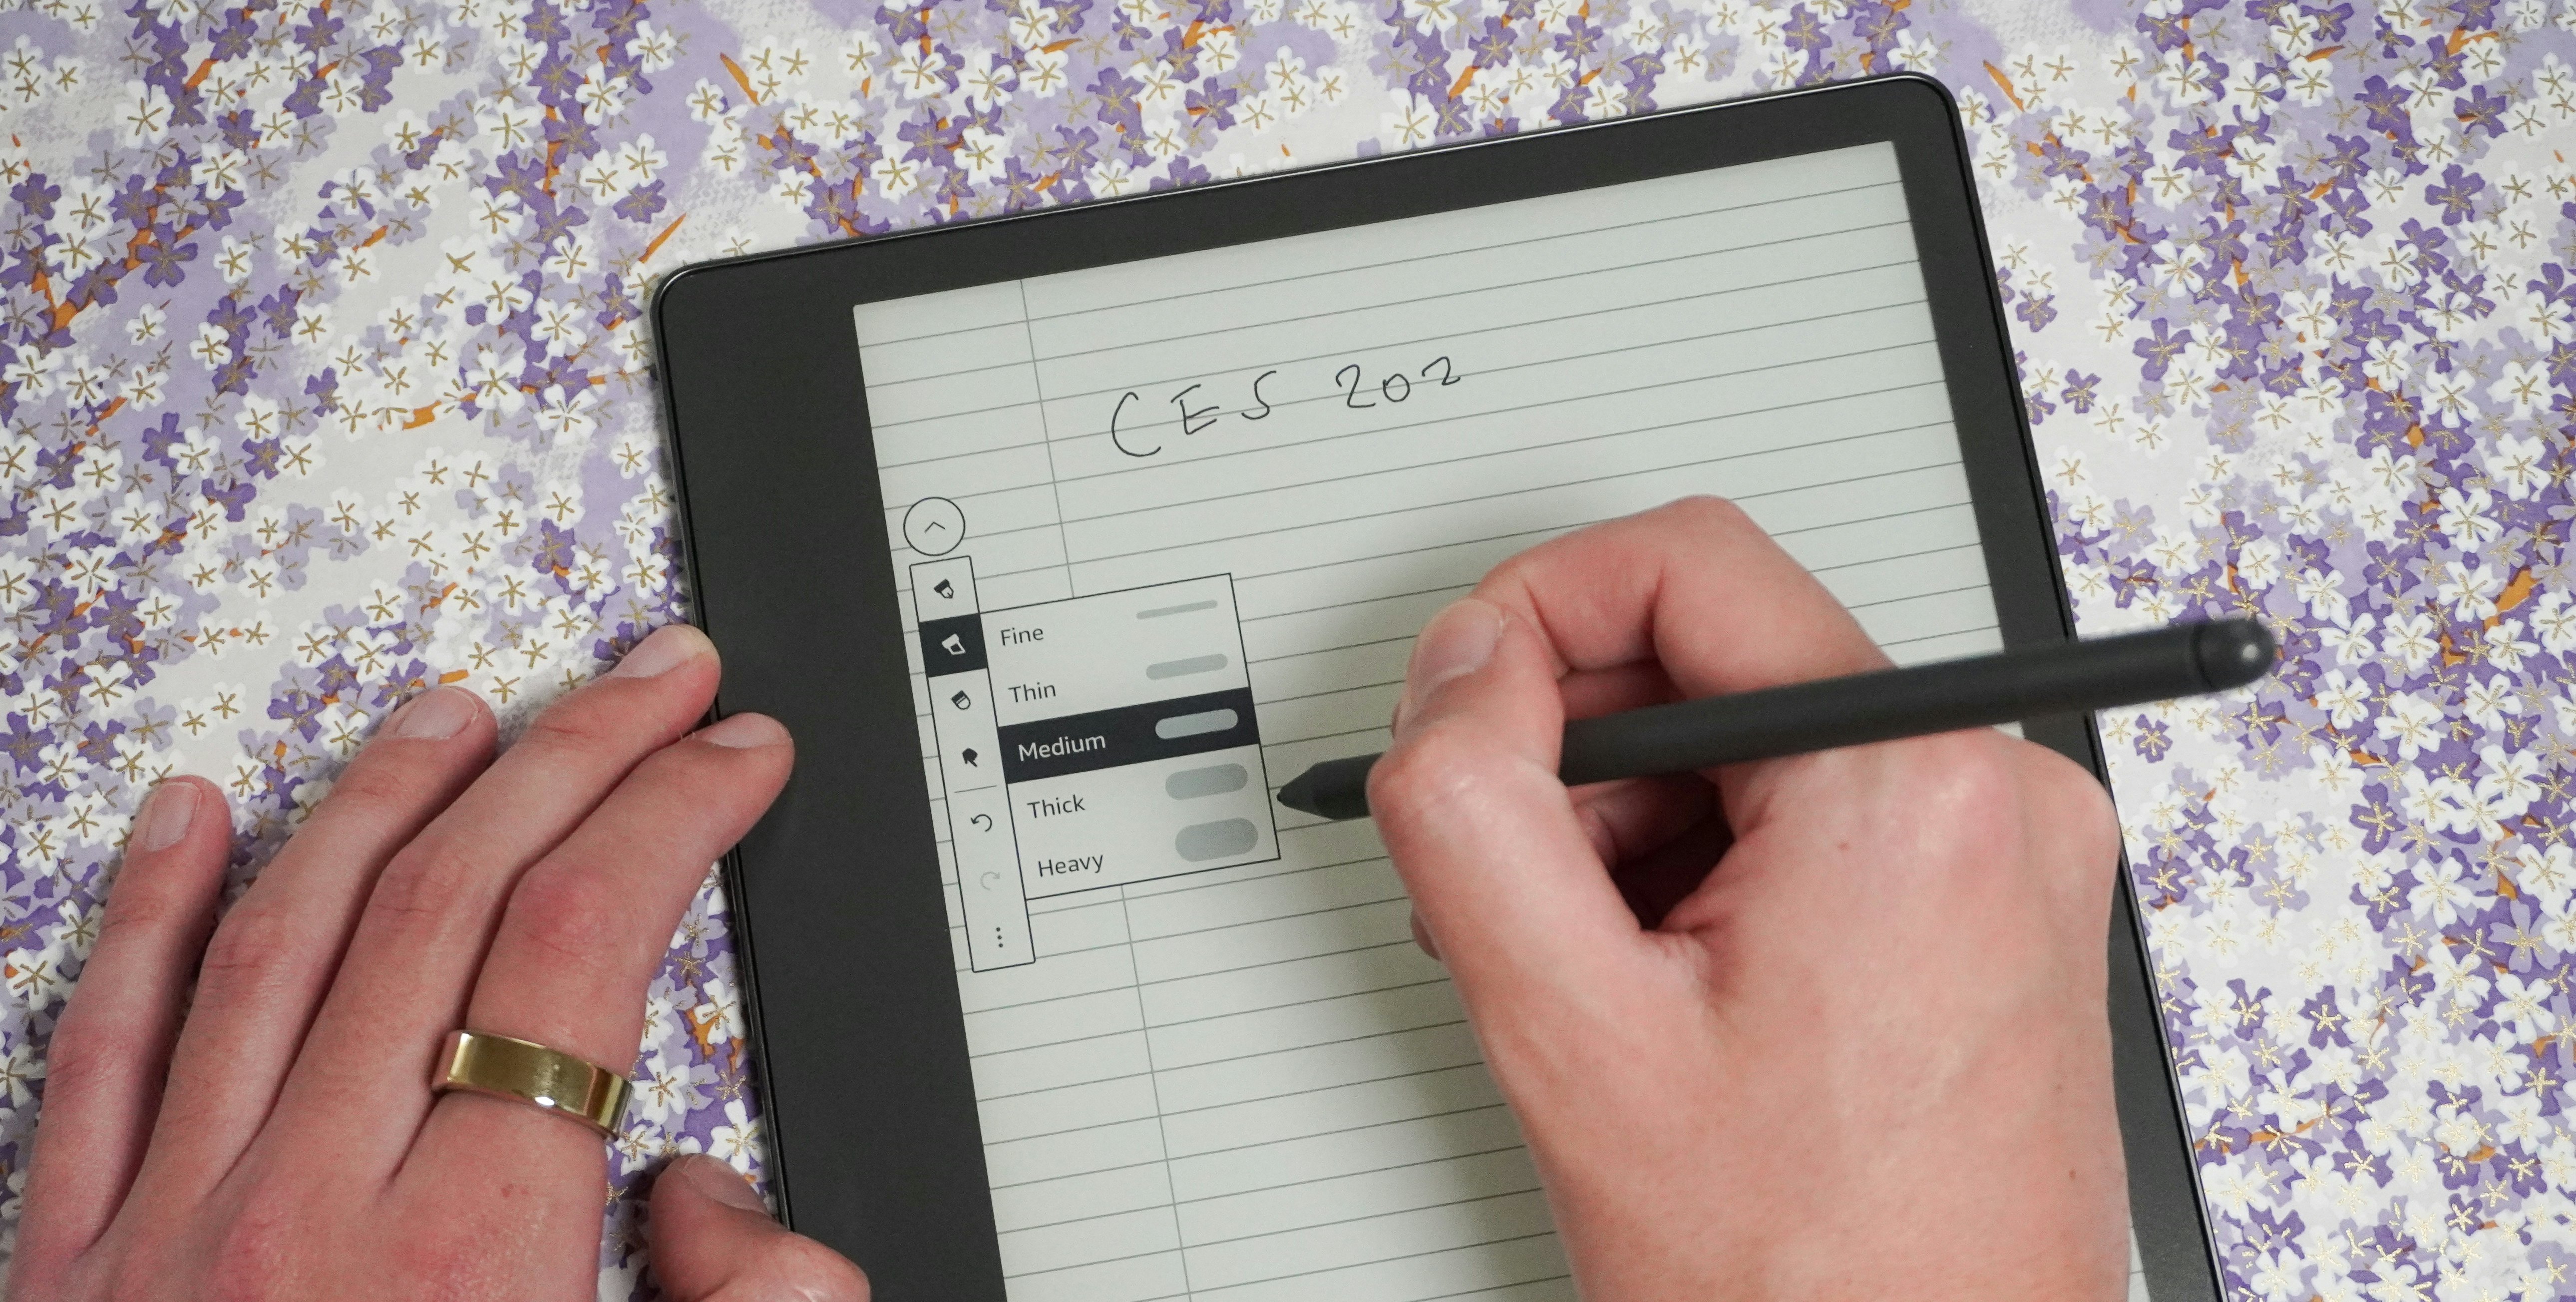 Kindle Scribe - Take Note